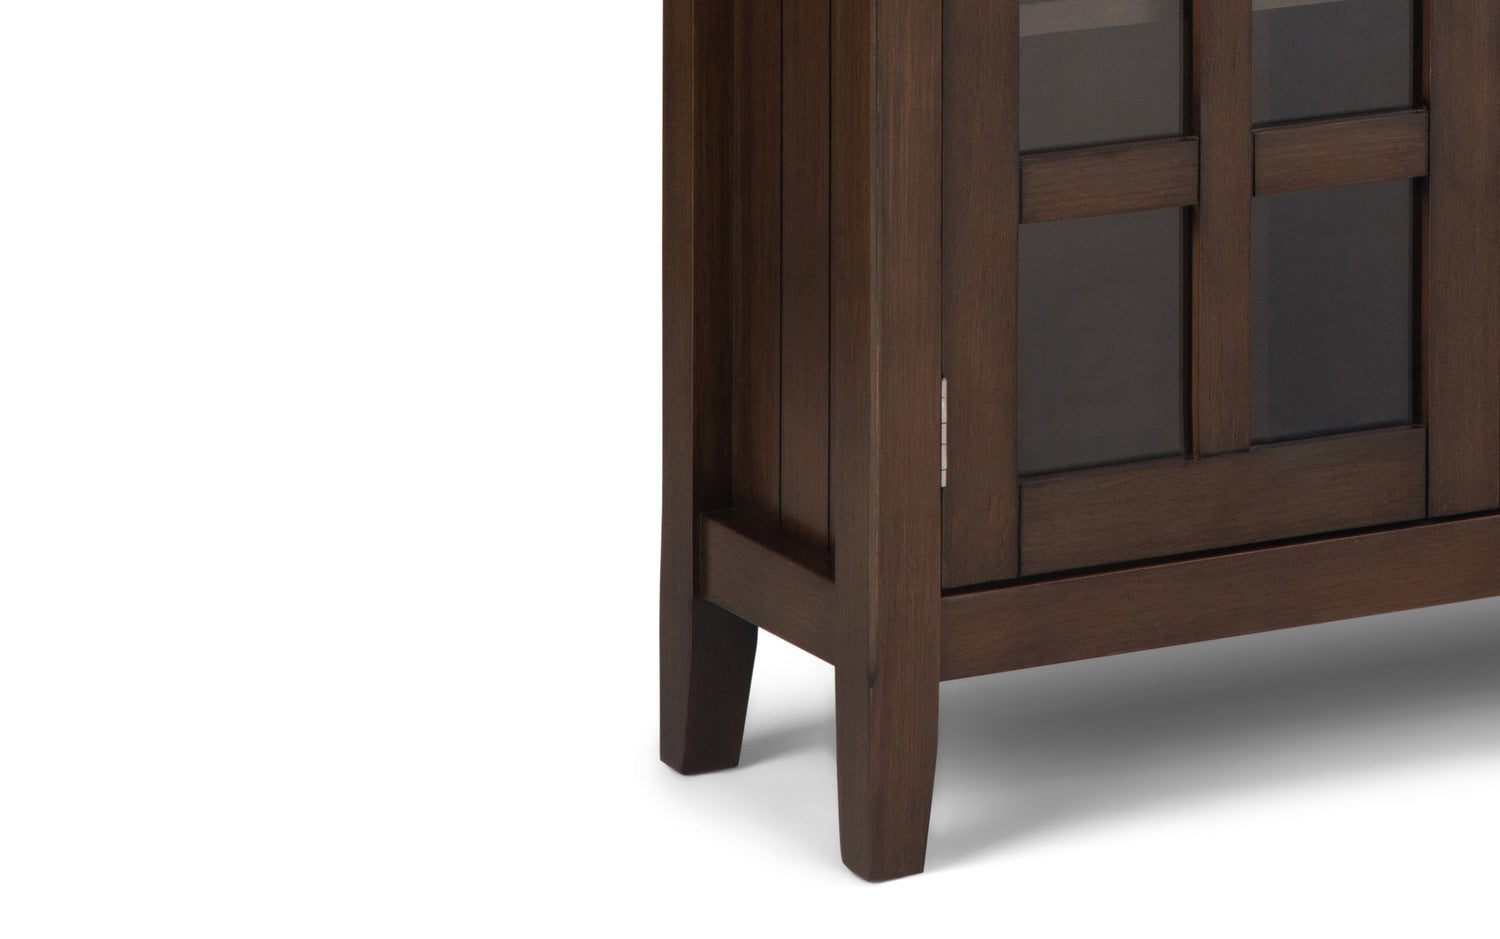 Natural Aged Brown | Acadian Entryway Storage Cabinet